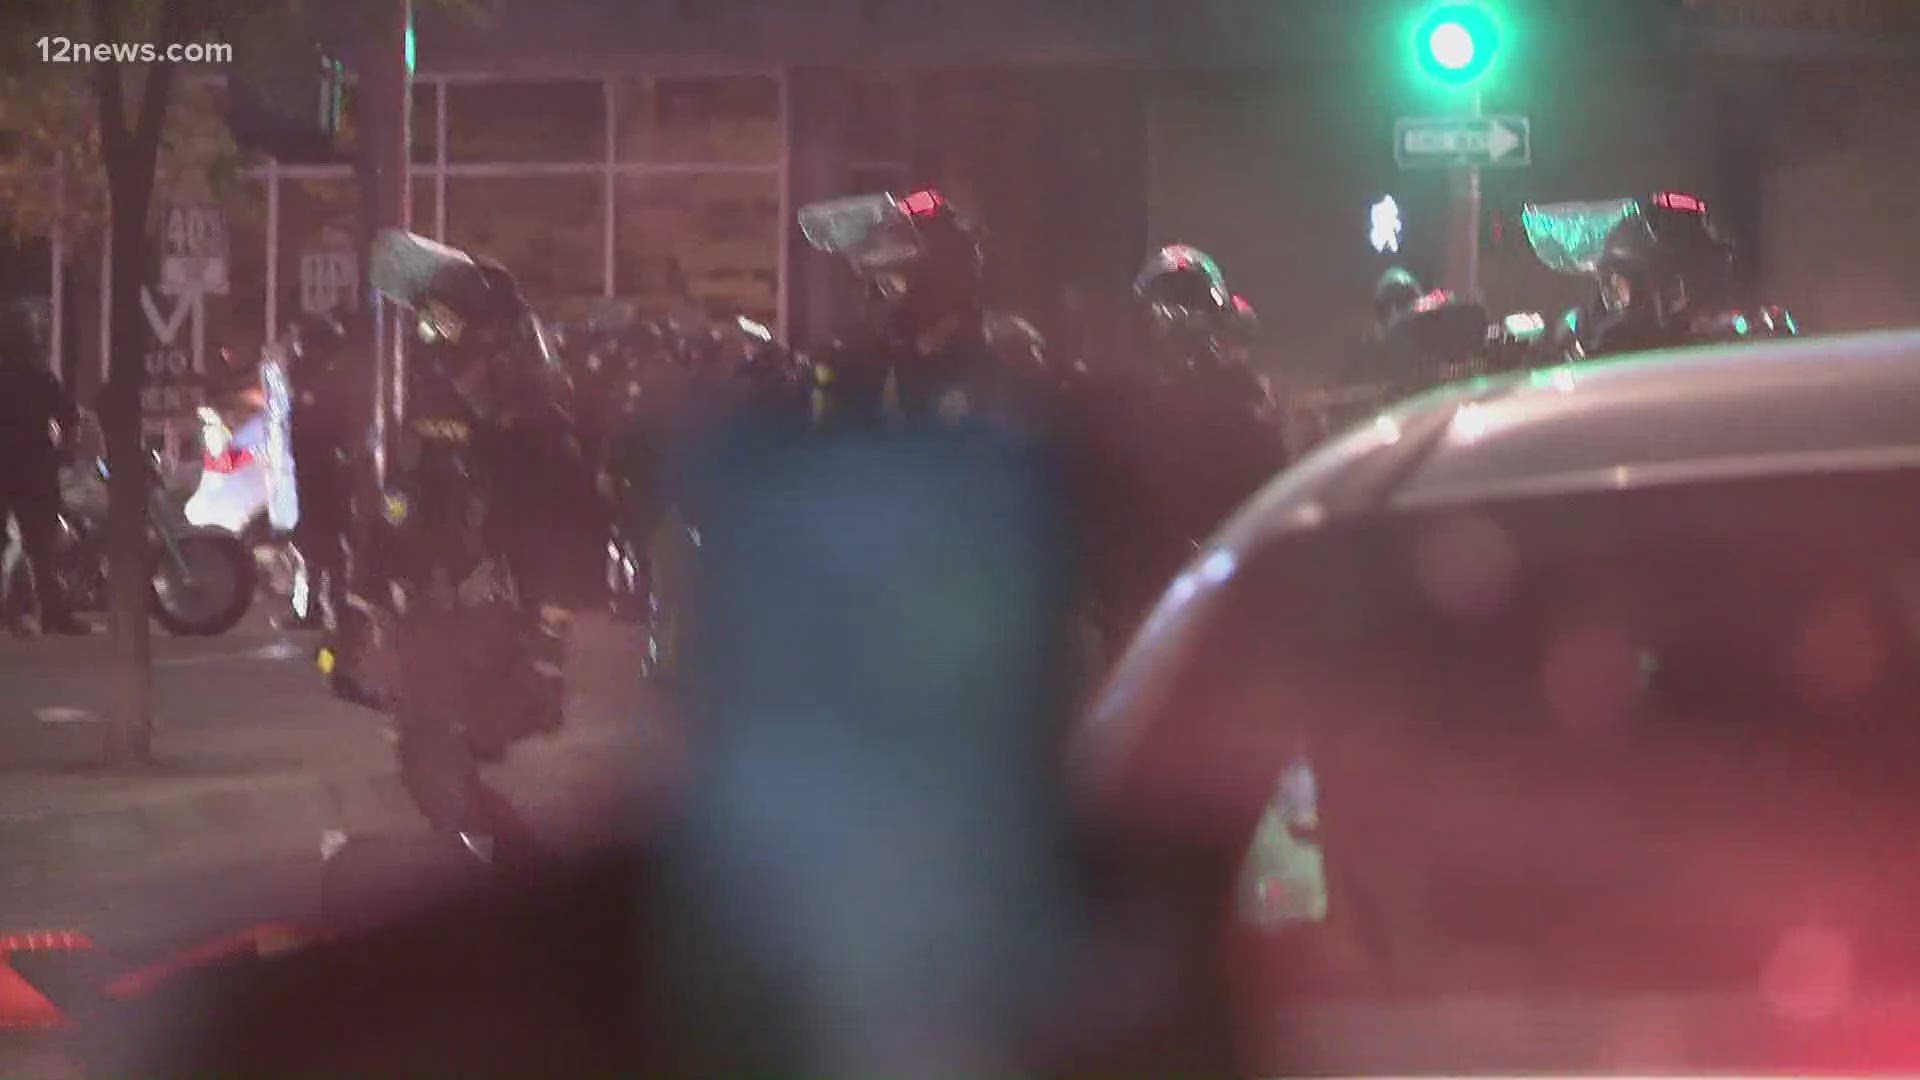 Officers in riot gear confront protesters in downtown Phoenix during Saturday night's protest. Bianca Buono has more.